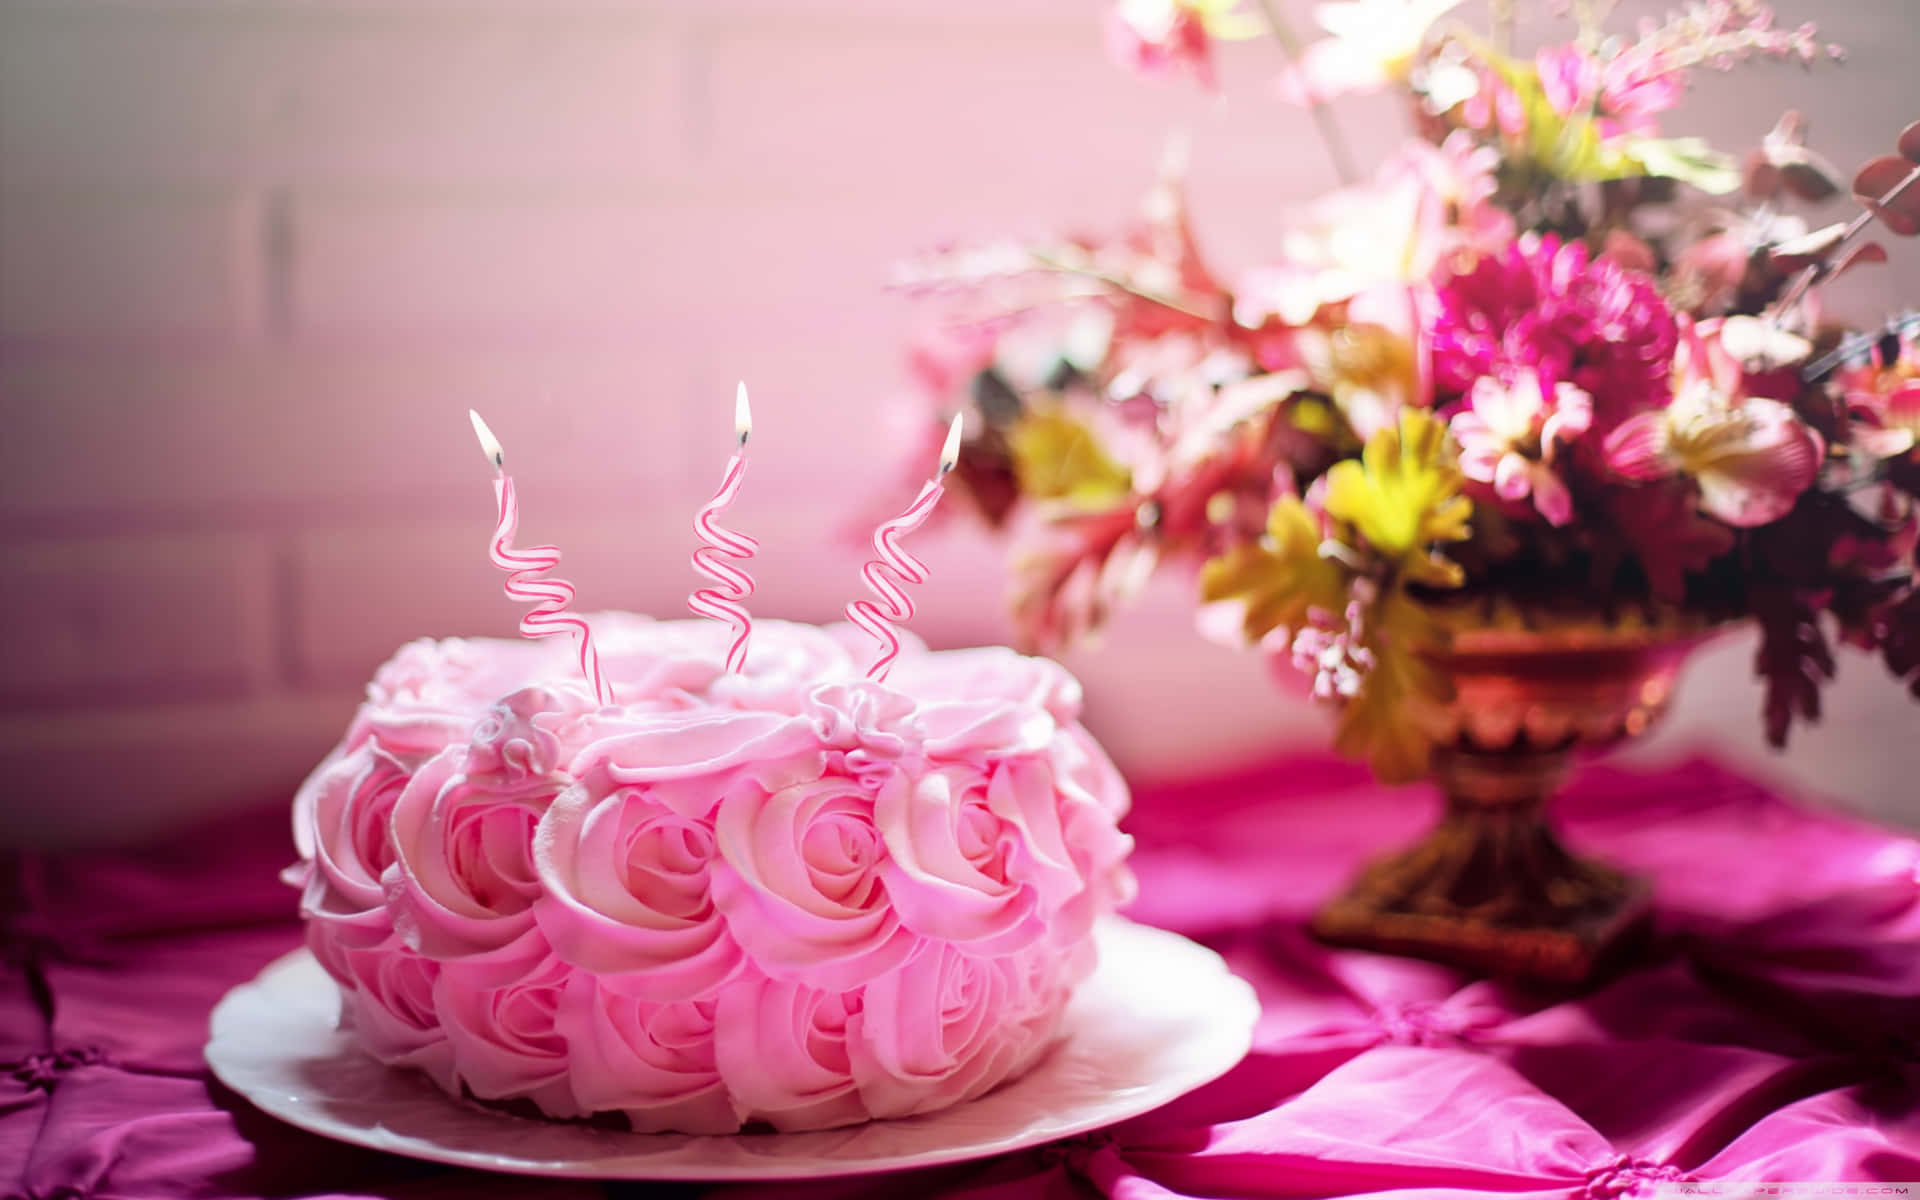 Celebrate this special occasion with some pink! Wallpaper